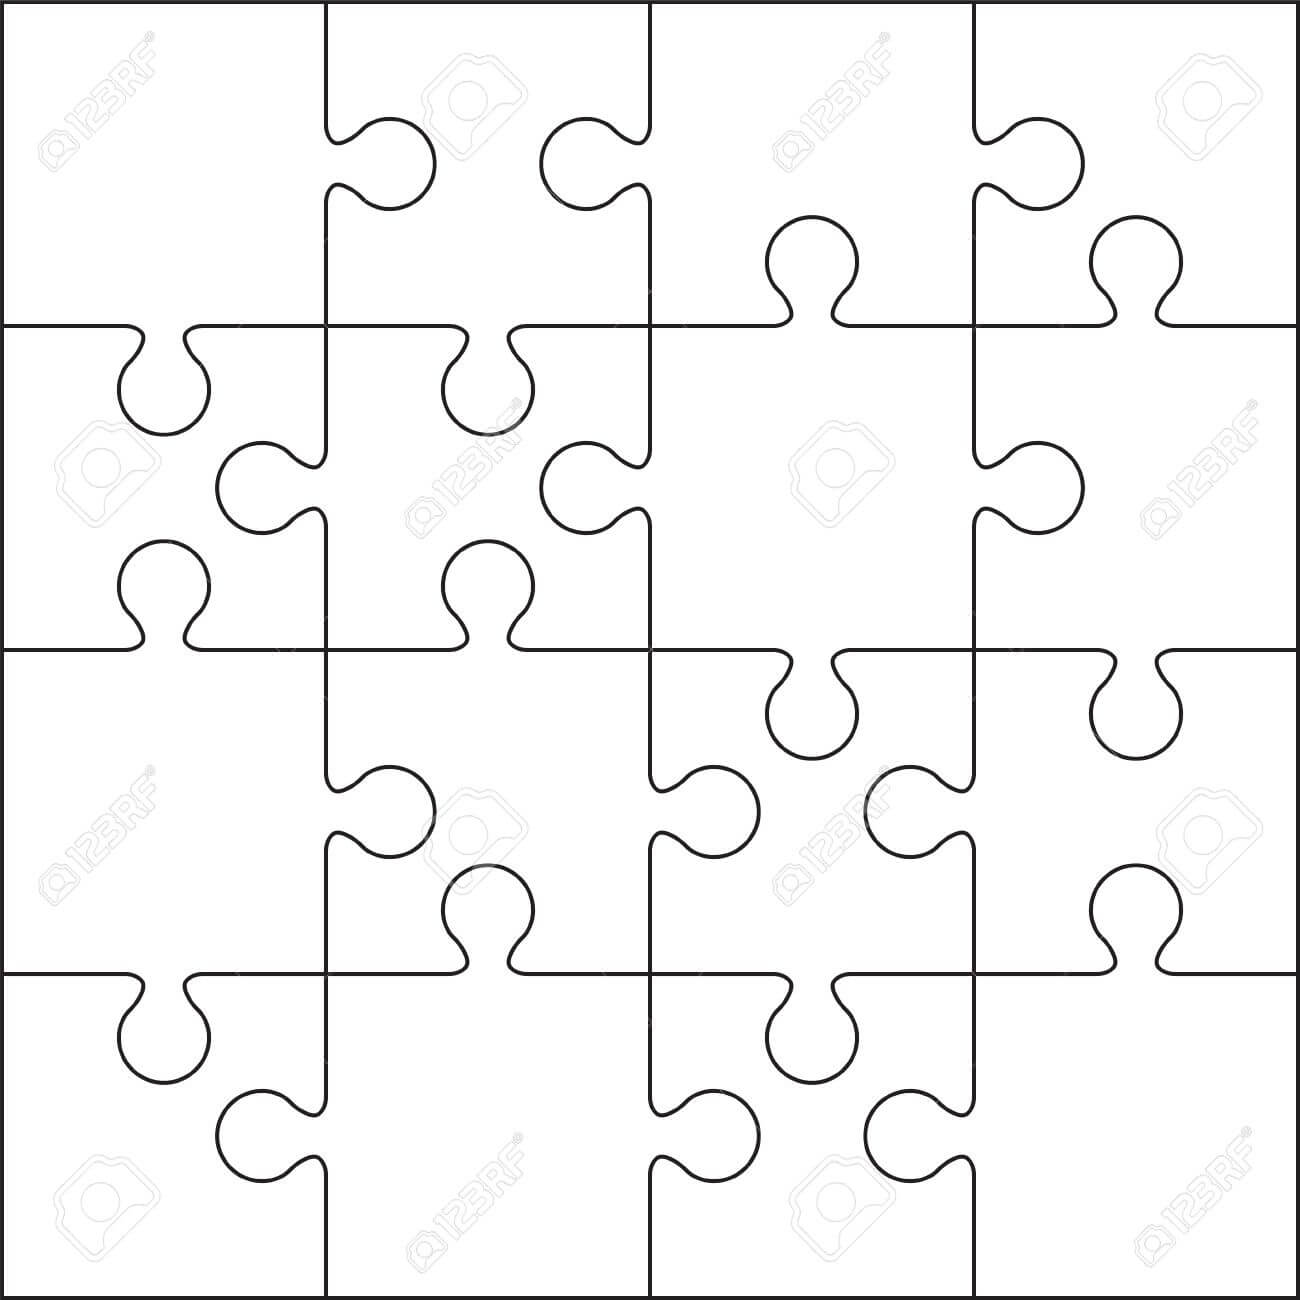 16 Jigsaw Puzzle Blank Template Or Cutting Guidelines With Blank Jigsaw Piece Template